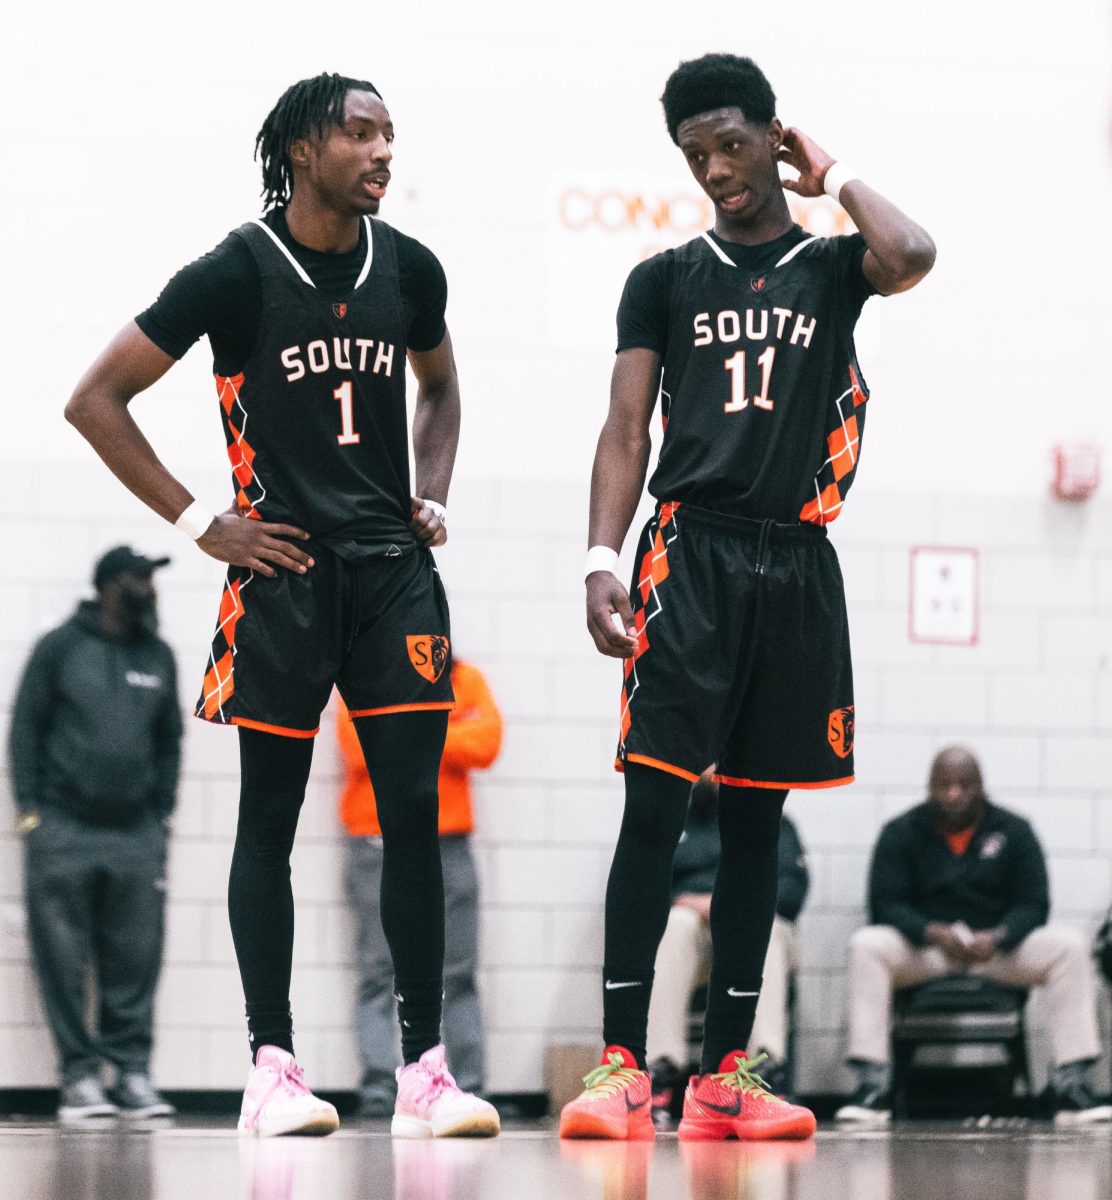 After a difficult ‘22-’23 season, South’s boys basketball team picks up the pace to try to win it all. South was doing well with the addition of a new point guard, all until their center got injured most of the way through the season. The team worked hard to overcome this challenge and finish off the season strong.